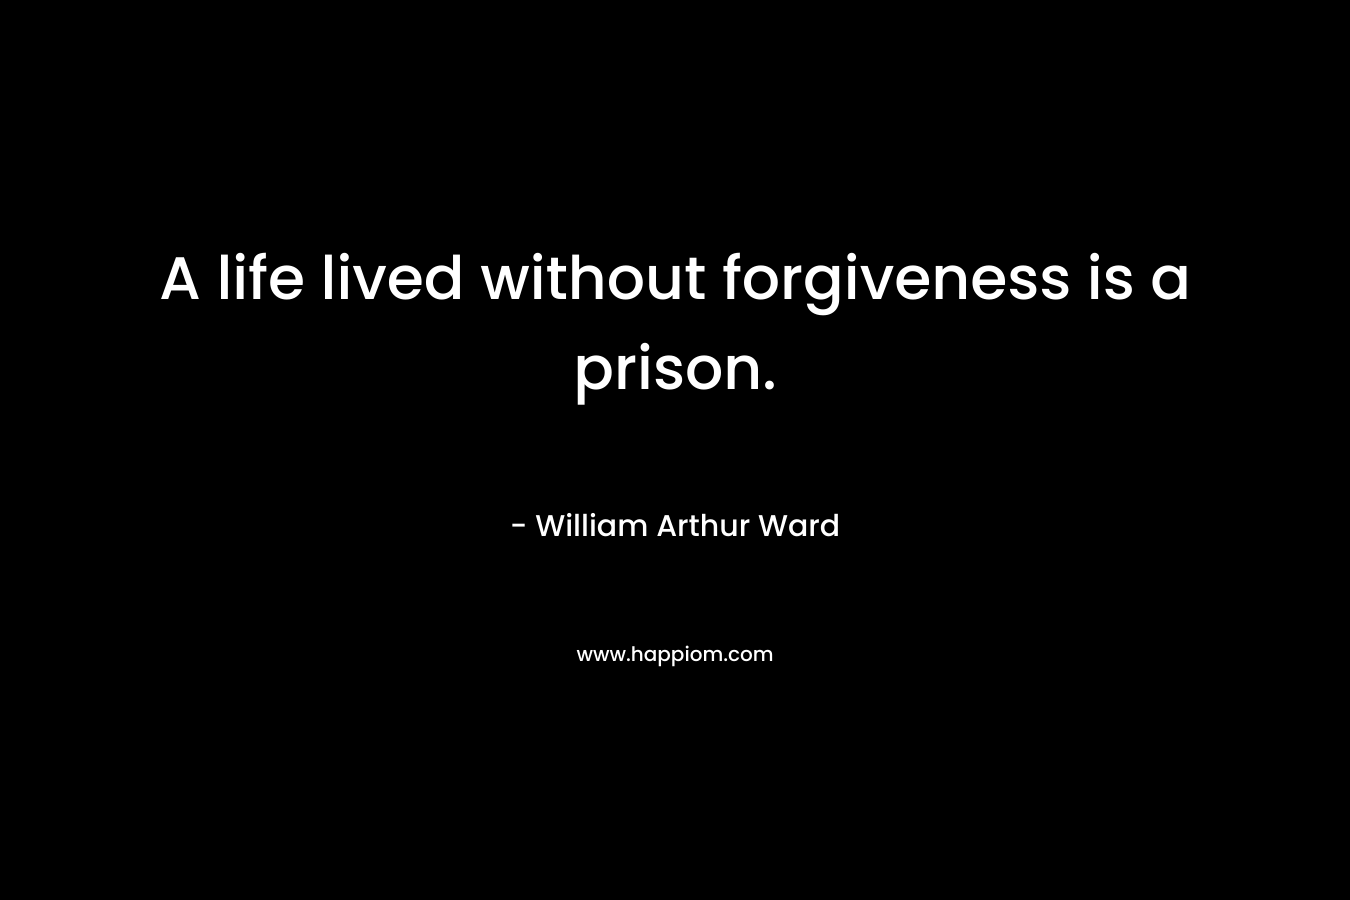 A life lived without forgiveness is a prison.